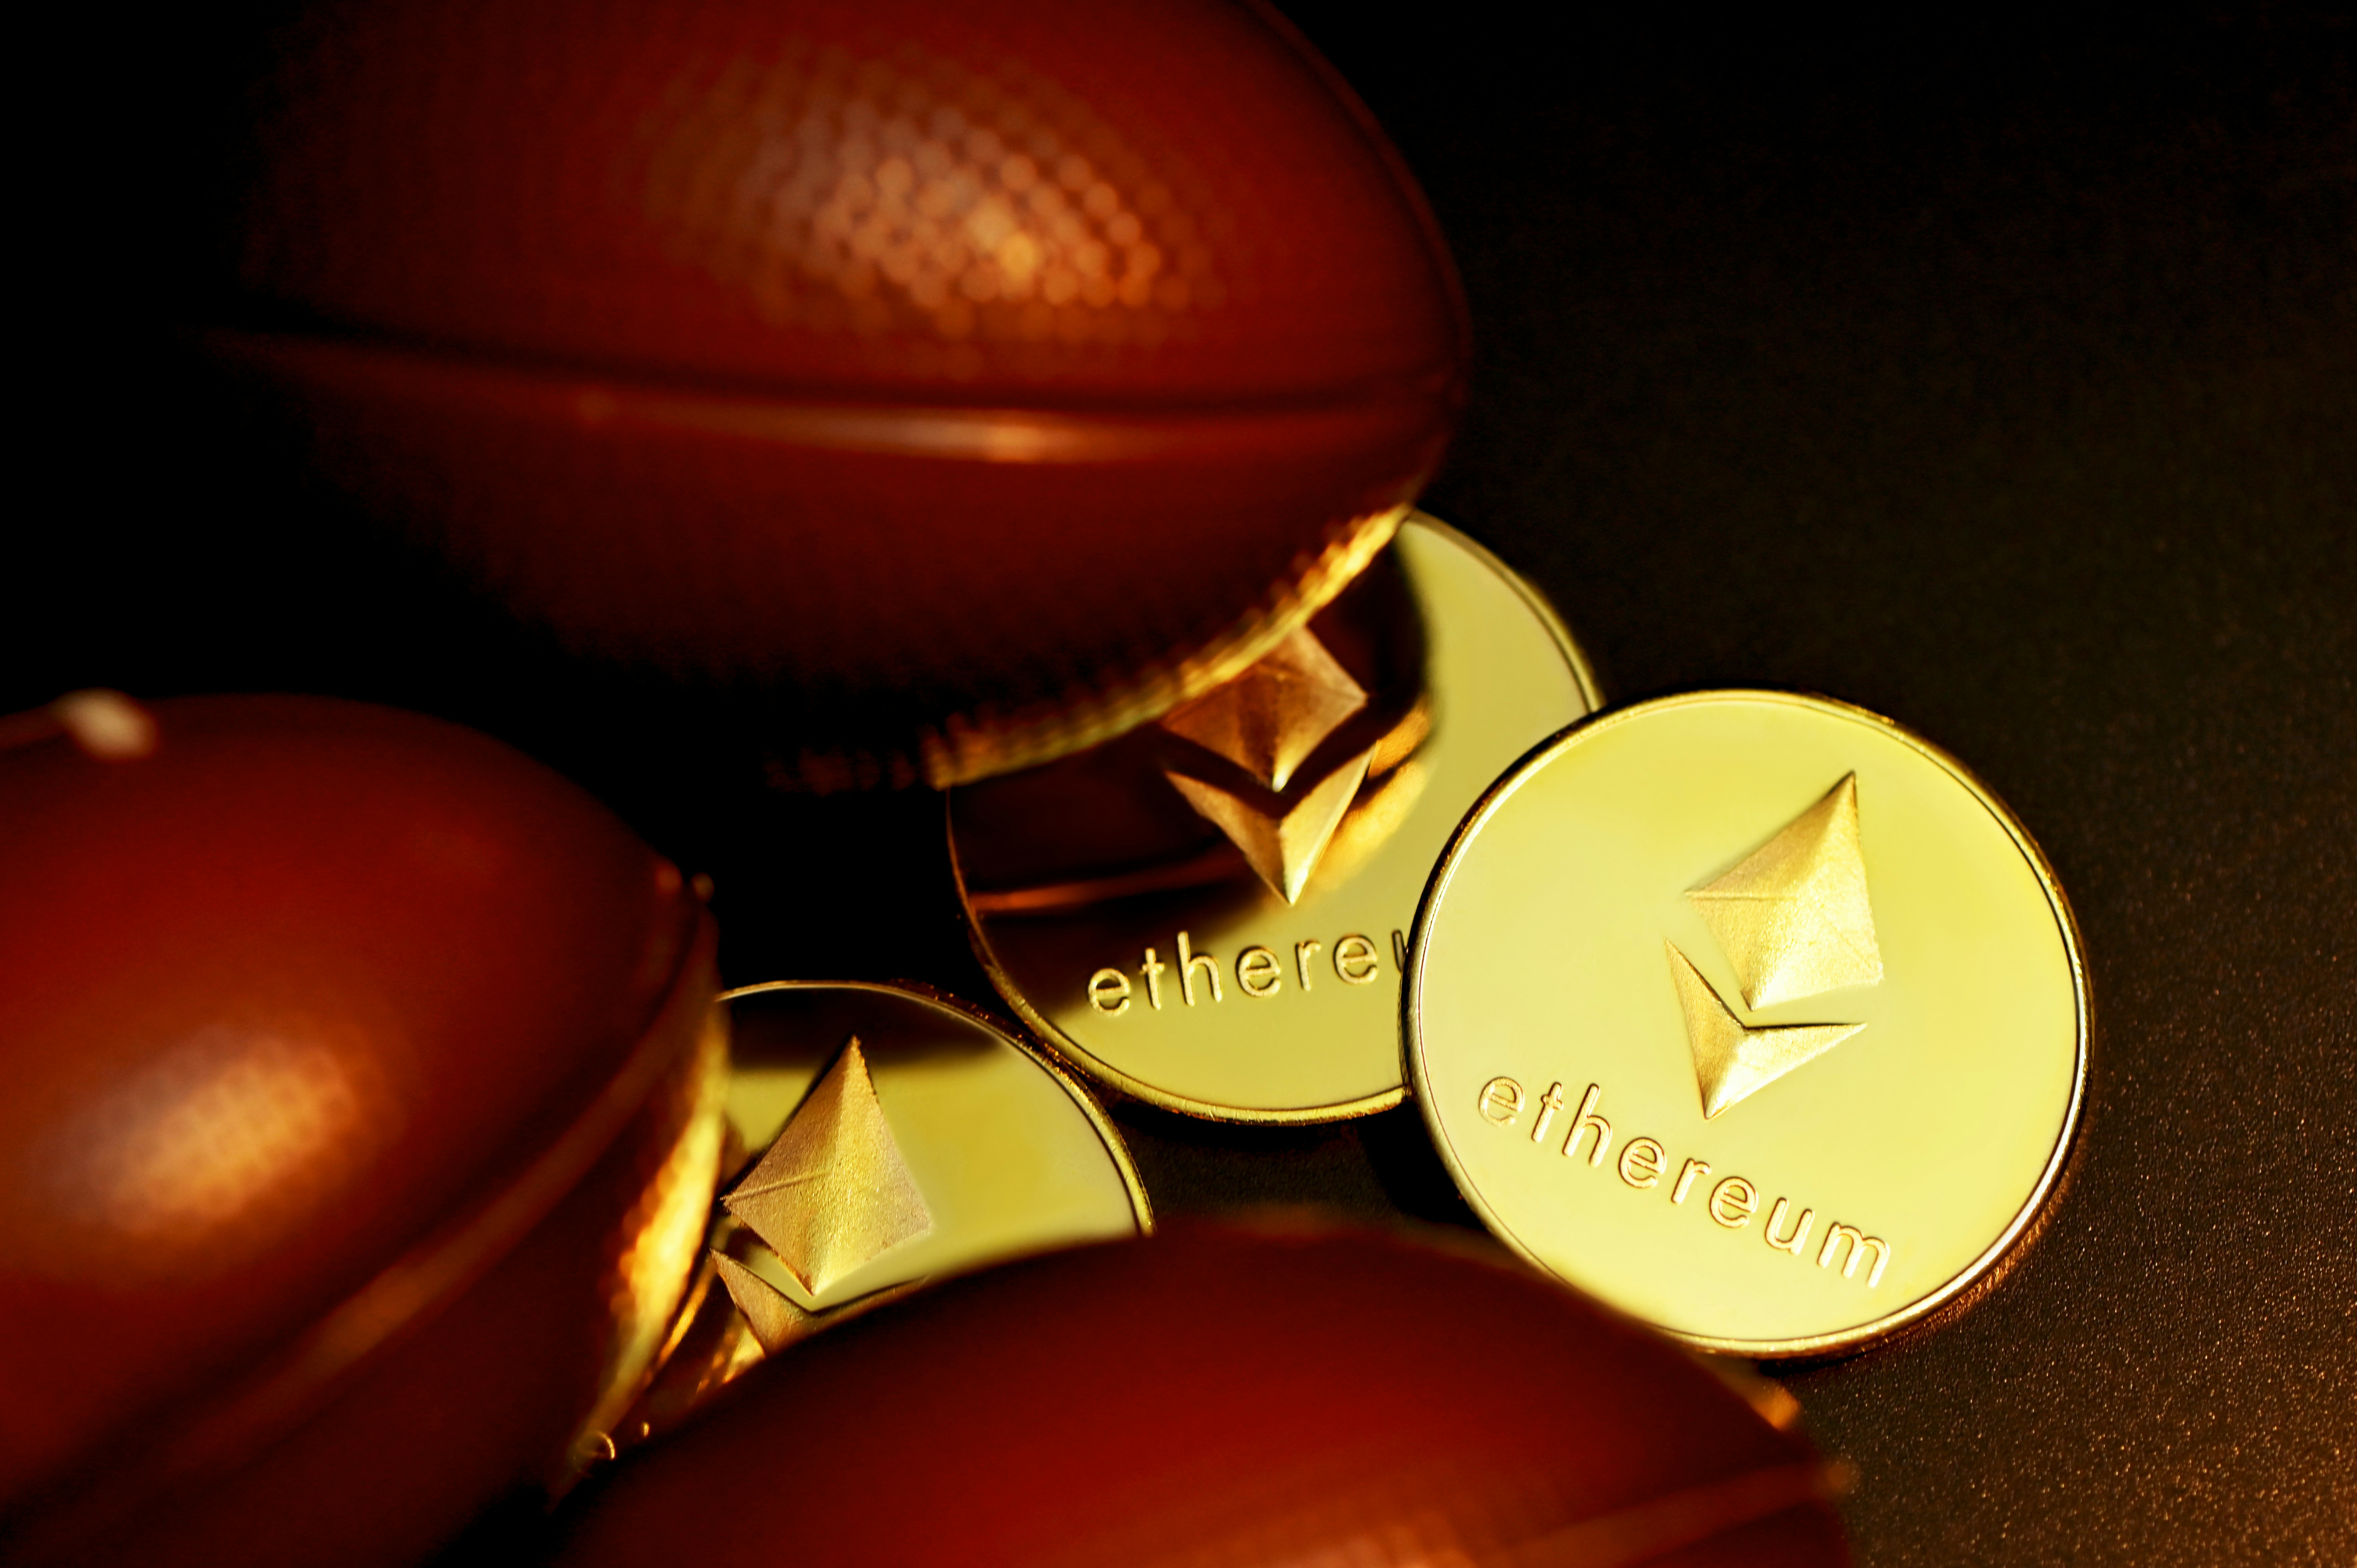 Three Ethereum coins and next to some footballs on the floor.